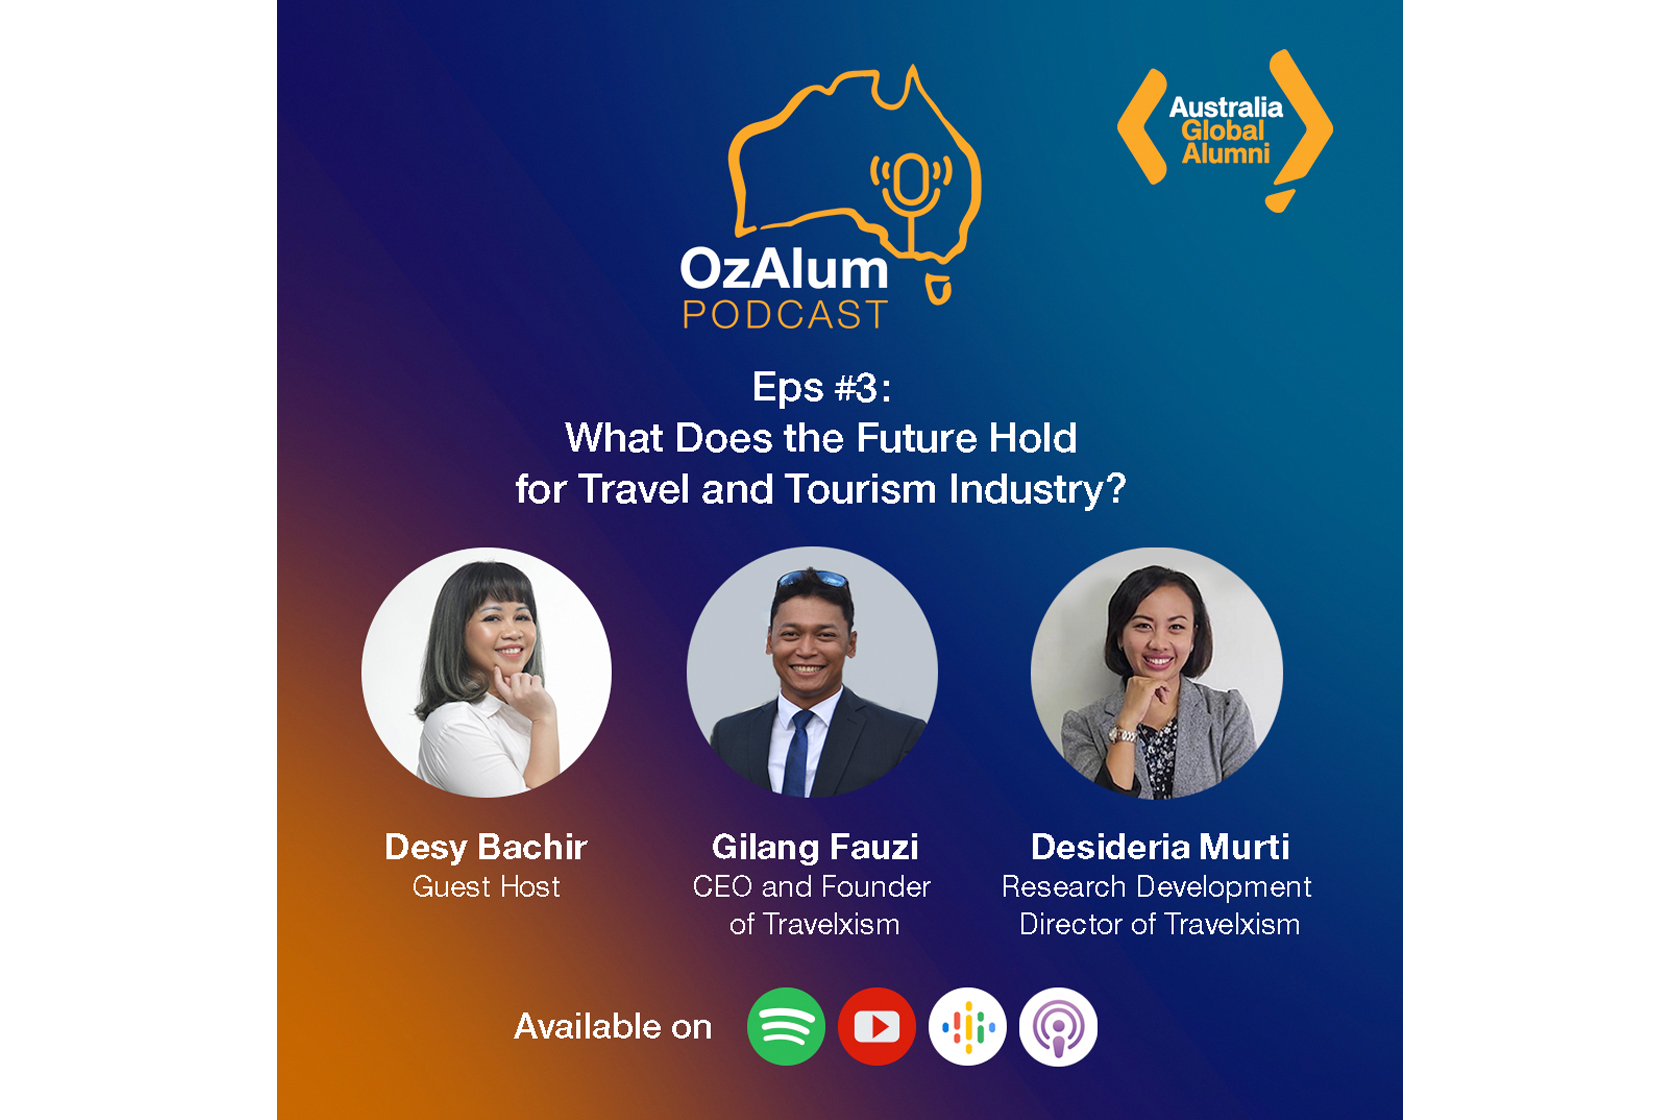 OzAlum Podcast Episode 3: What Does the Future Hold for Travel and Tourism Industry?